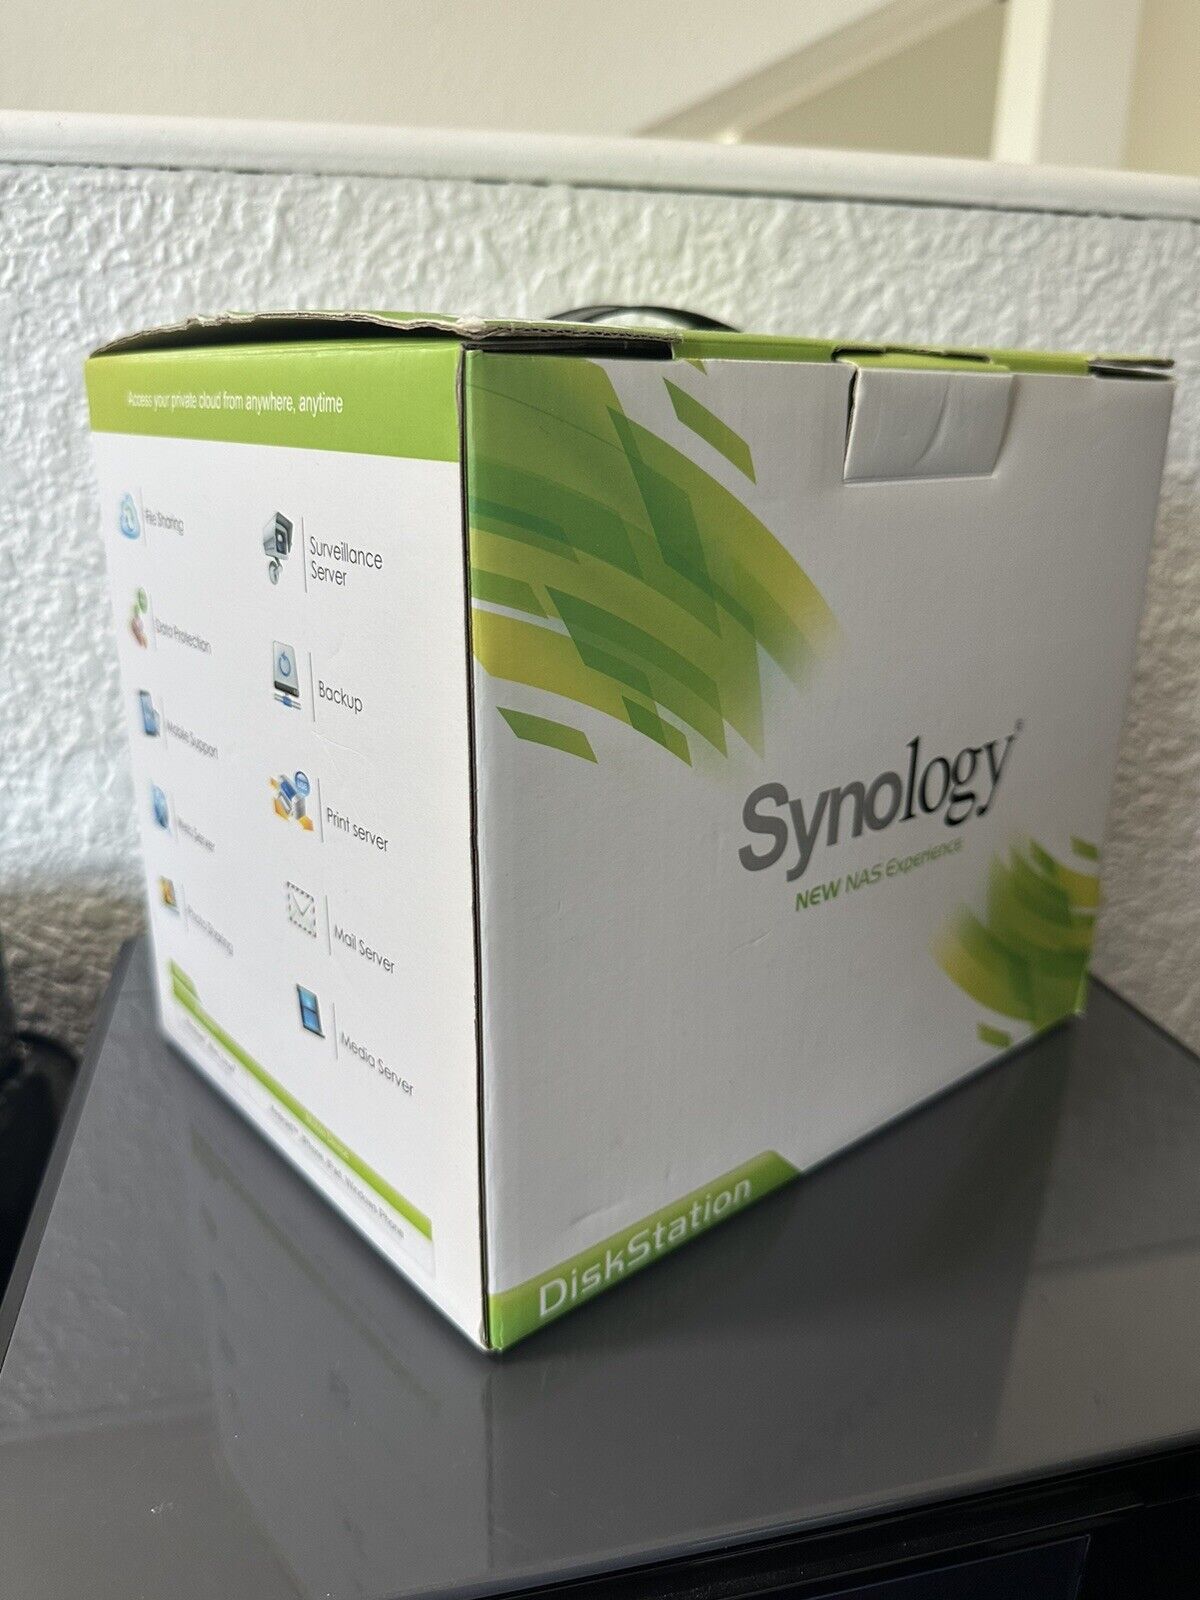 Synology DS213+ 2 bay NAS